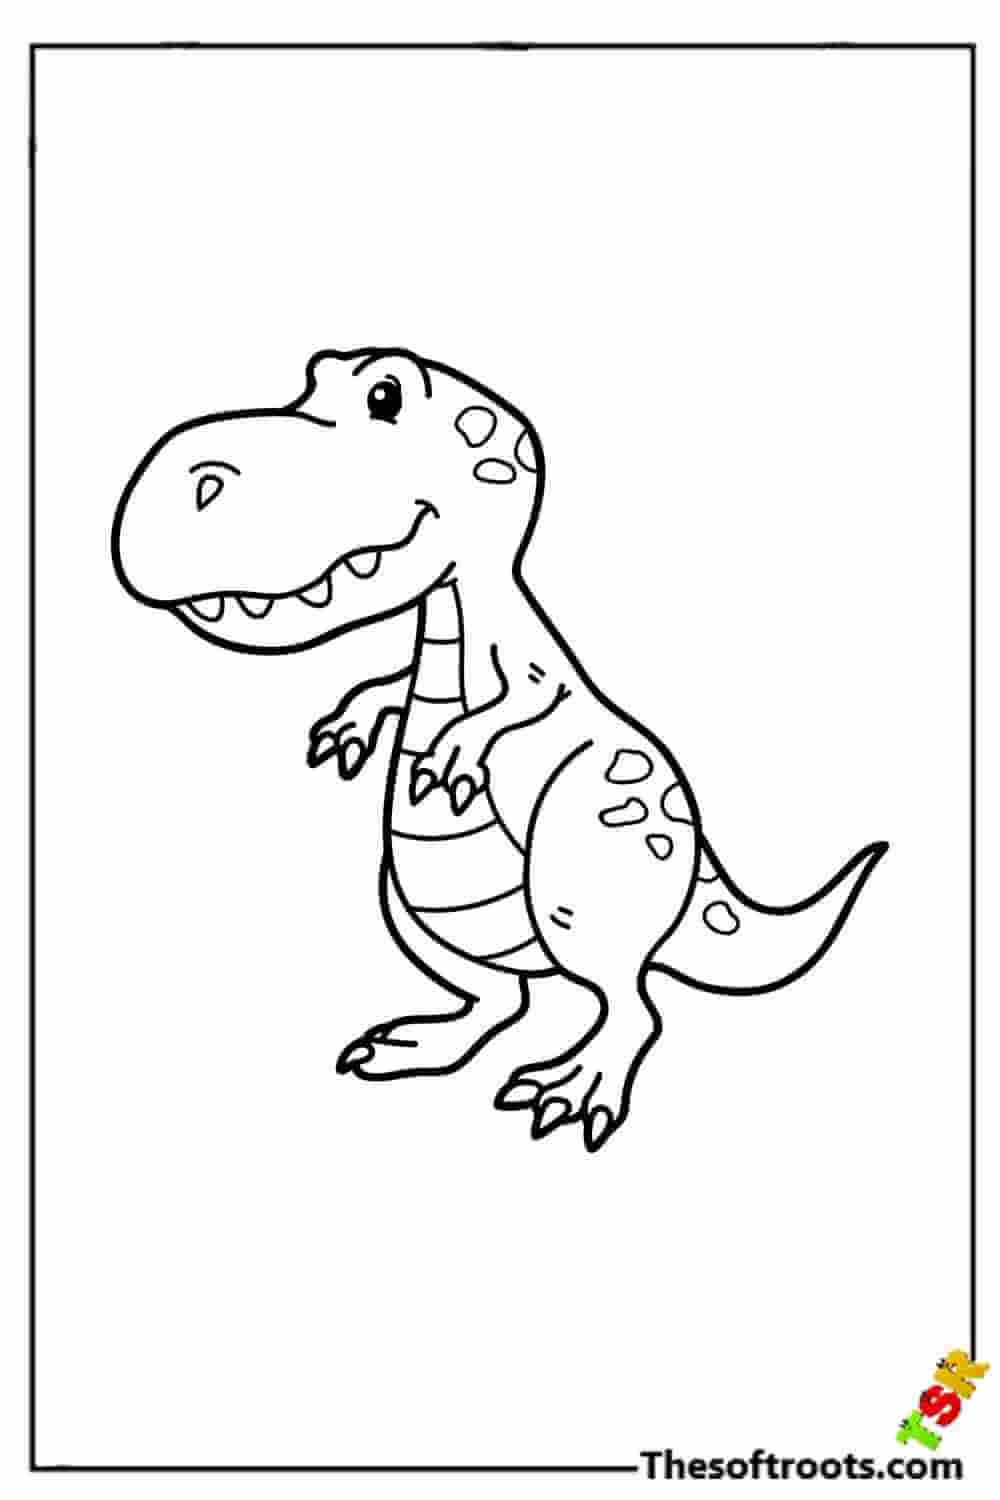 Cartoon T-Rex coloring pages